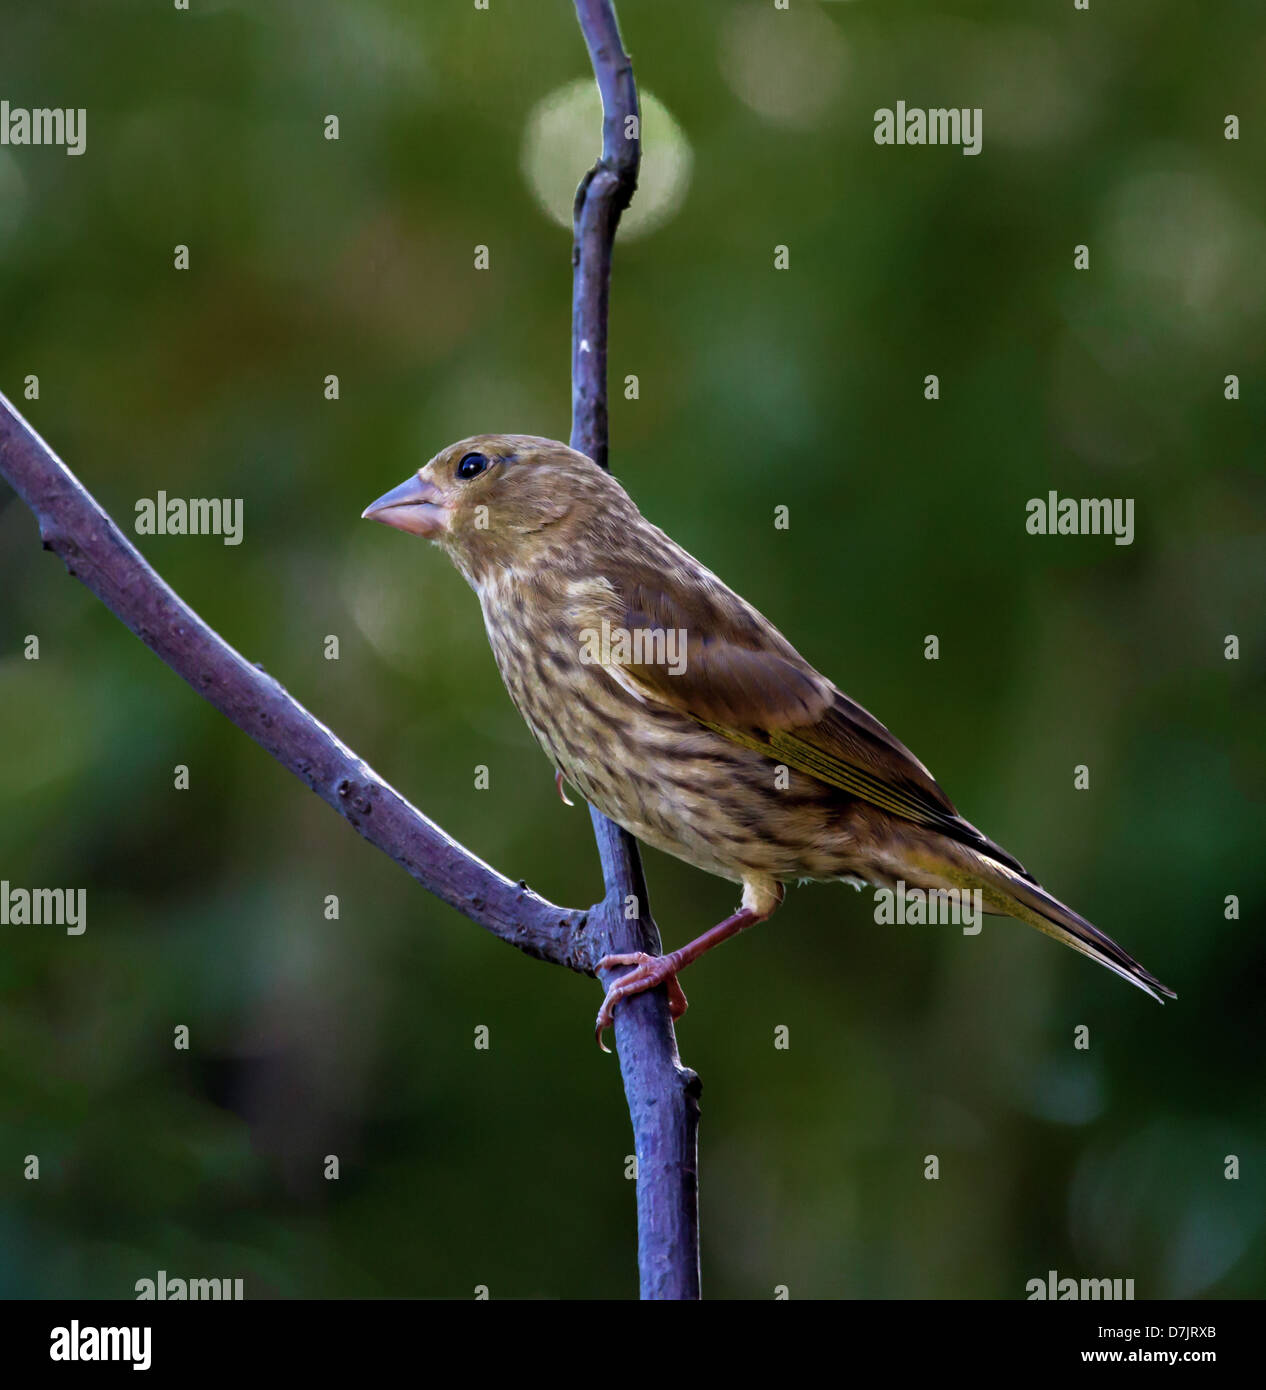 A female greenfinch on the branch of a tree Stock Photo